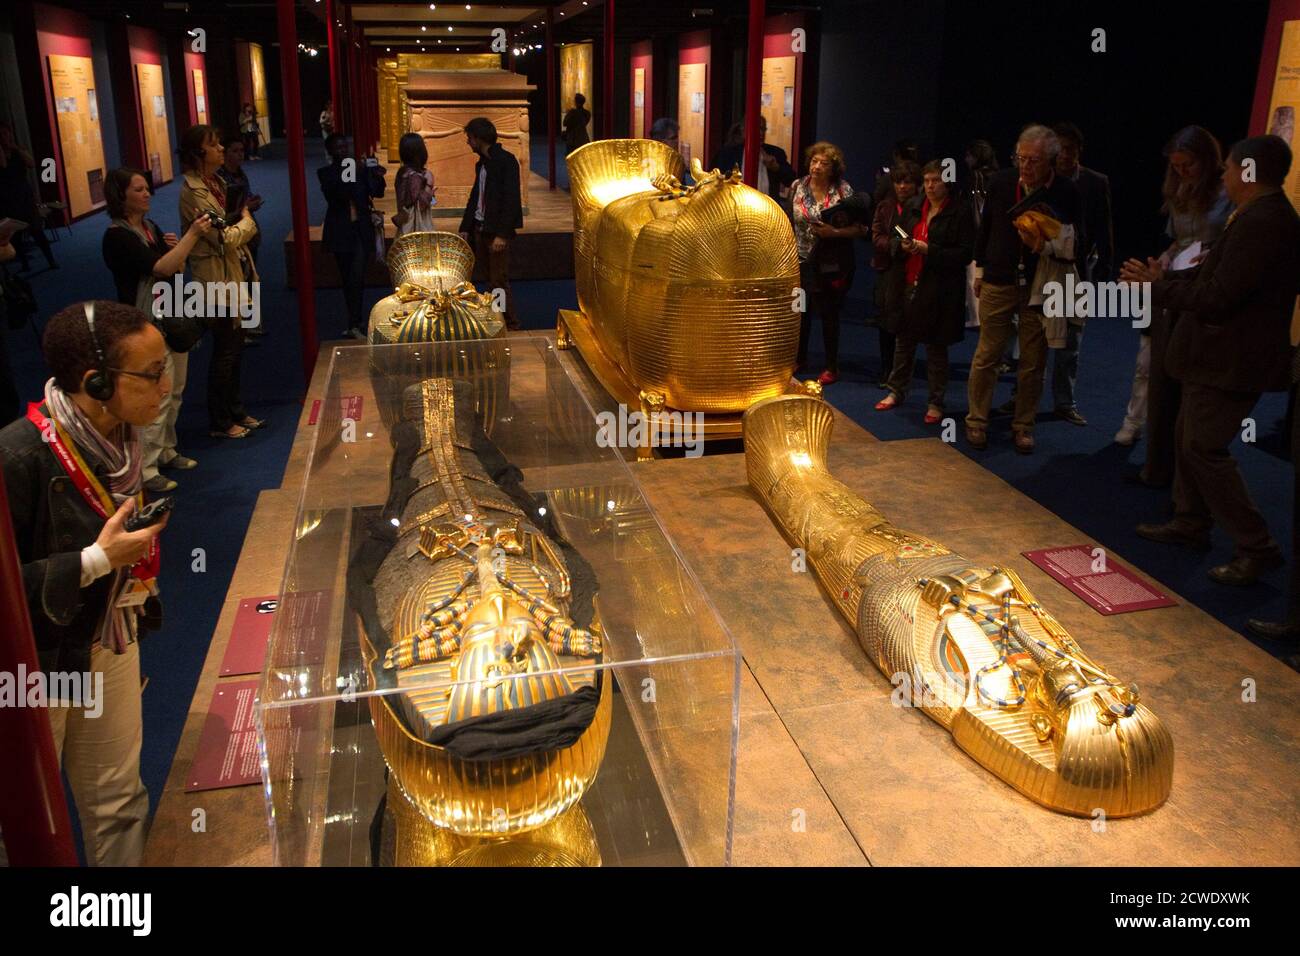 A Visitor Looks At A Replica Of A Sarcophagus Of Pharaoh Tutankhamun